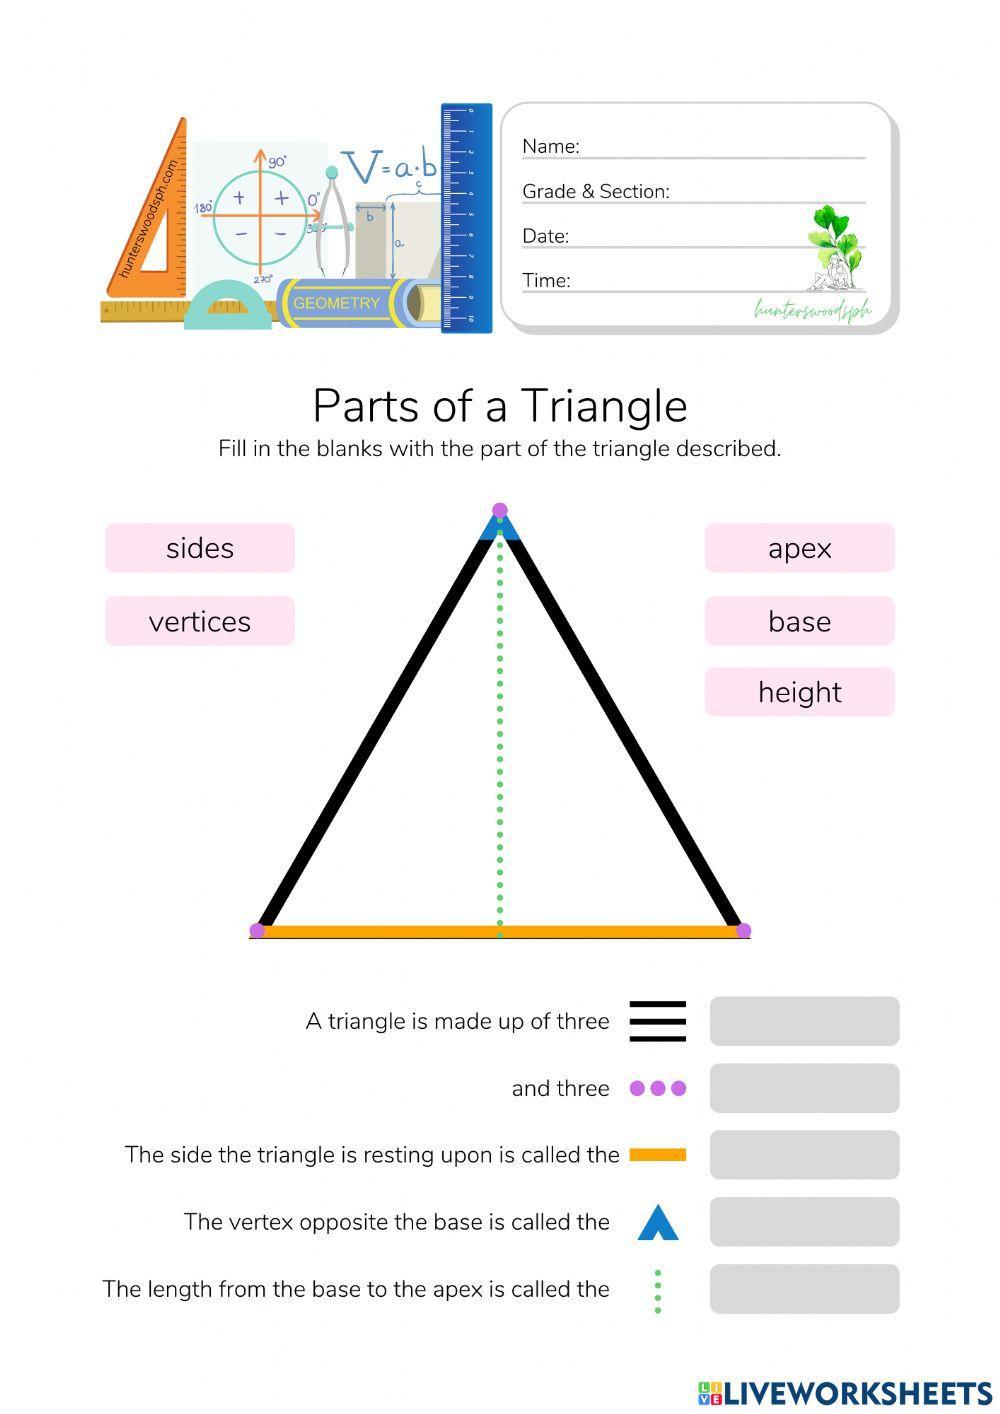 Parts of a Triangle